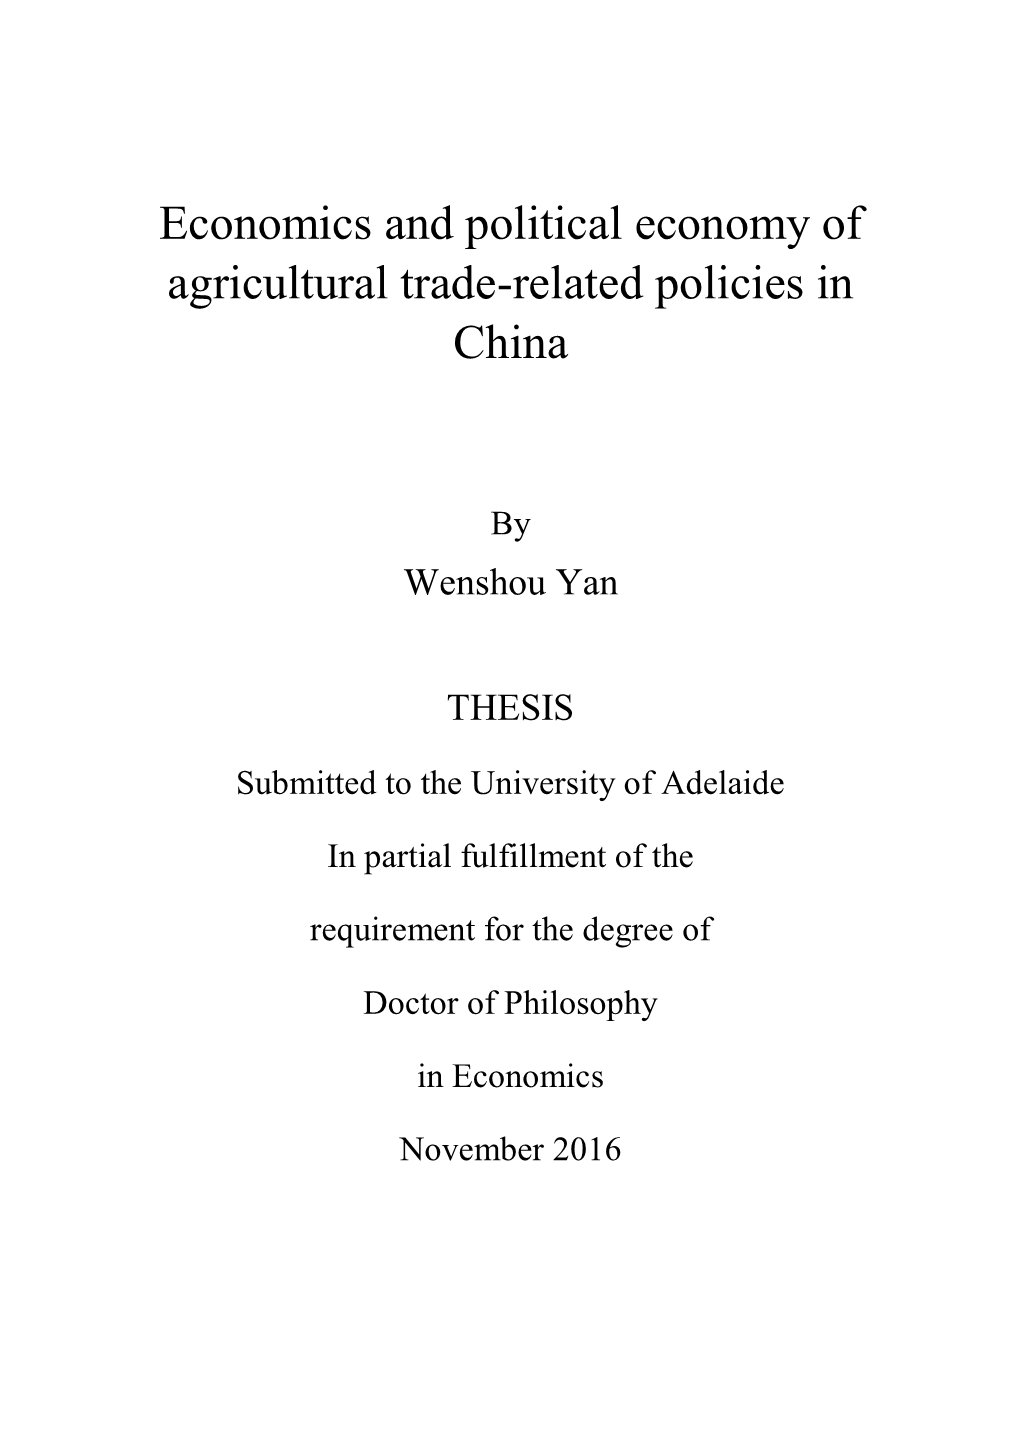 Economics and Political Economy of Agricultural Trade-Related Policies in China